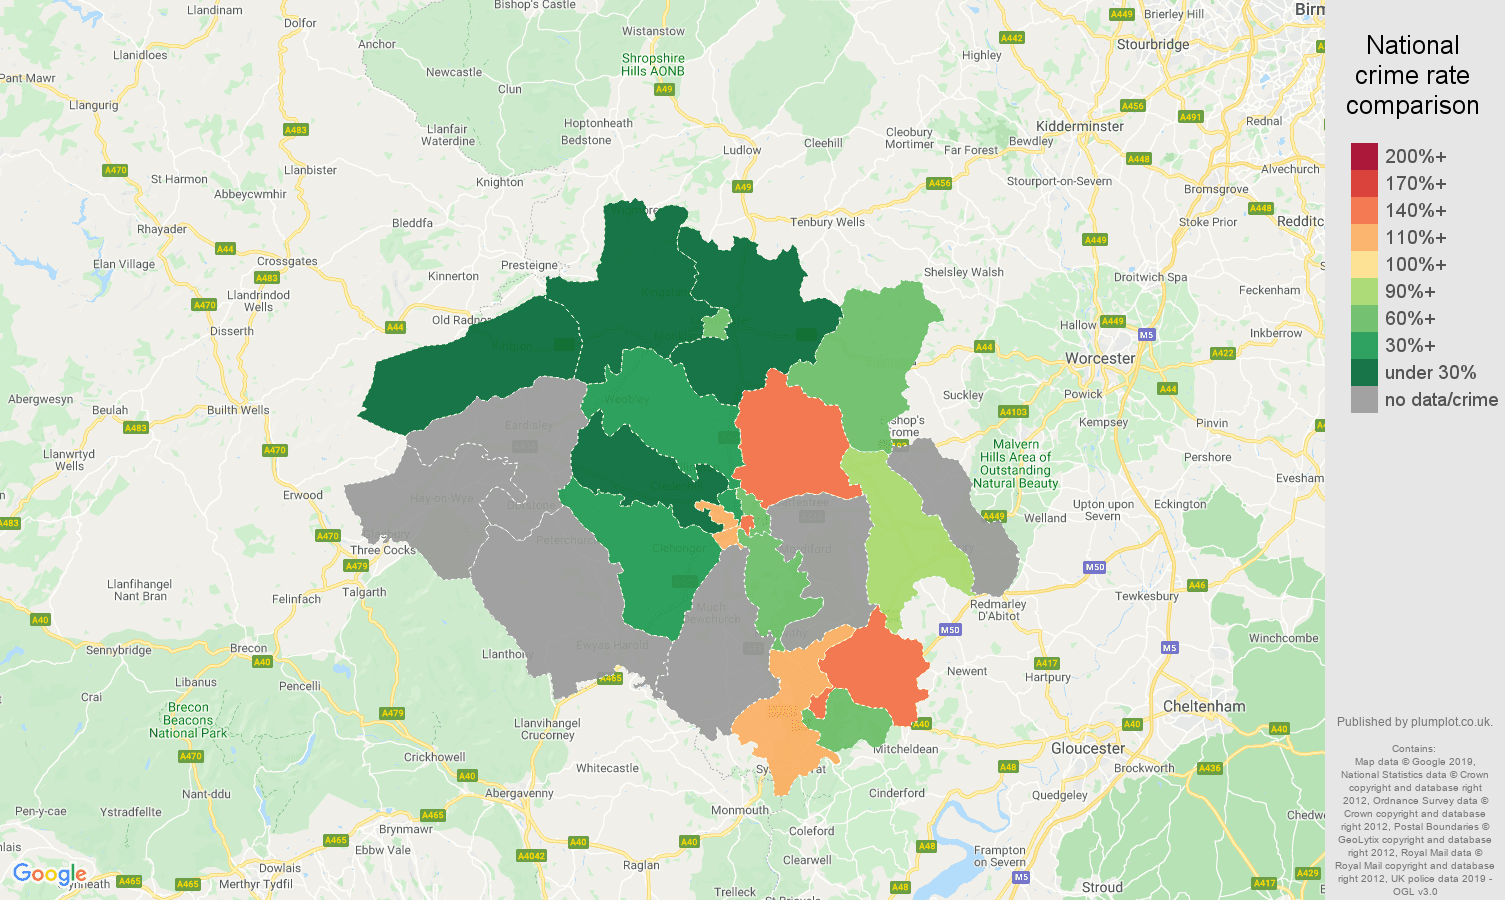 Hereford possession of weapons crime rate comparison map